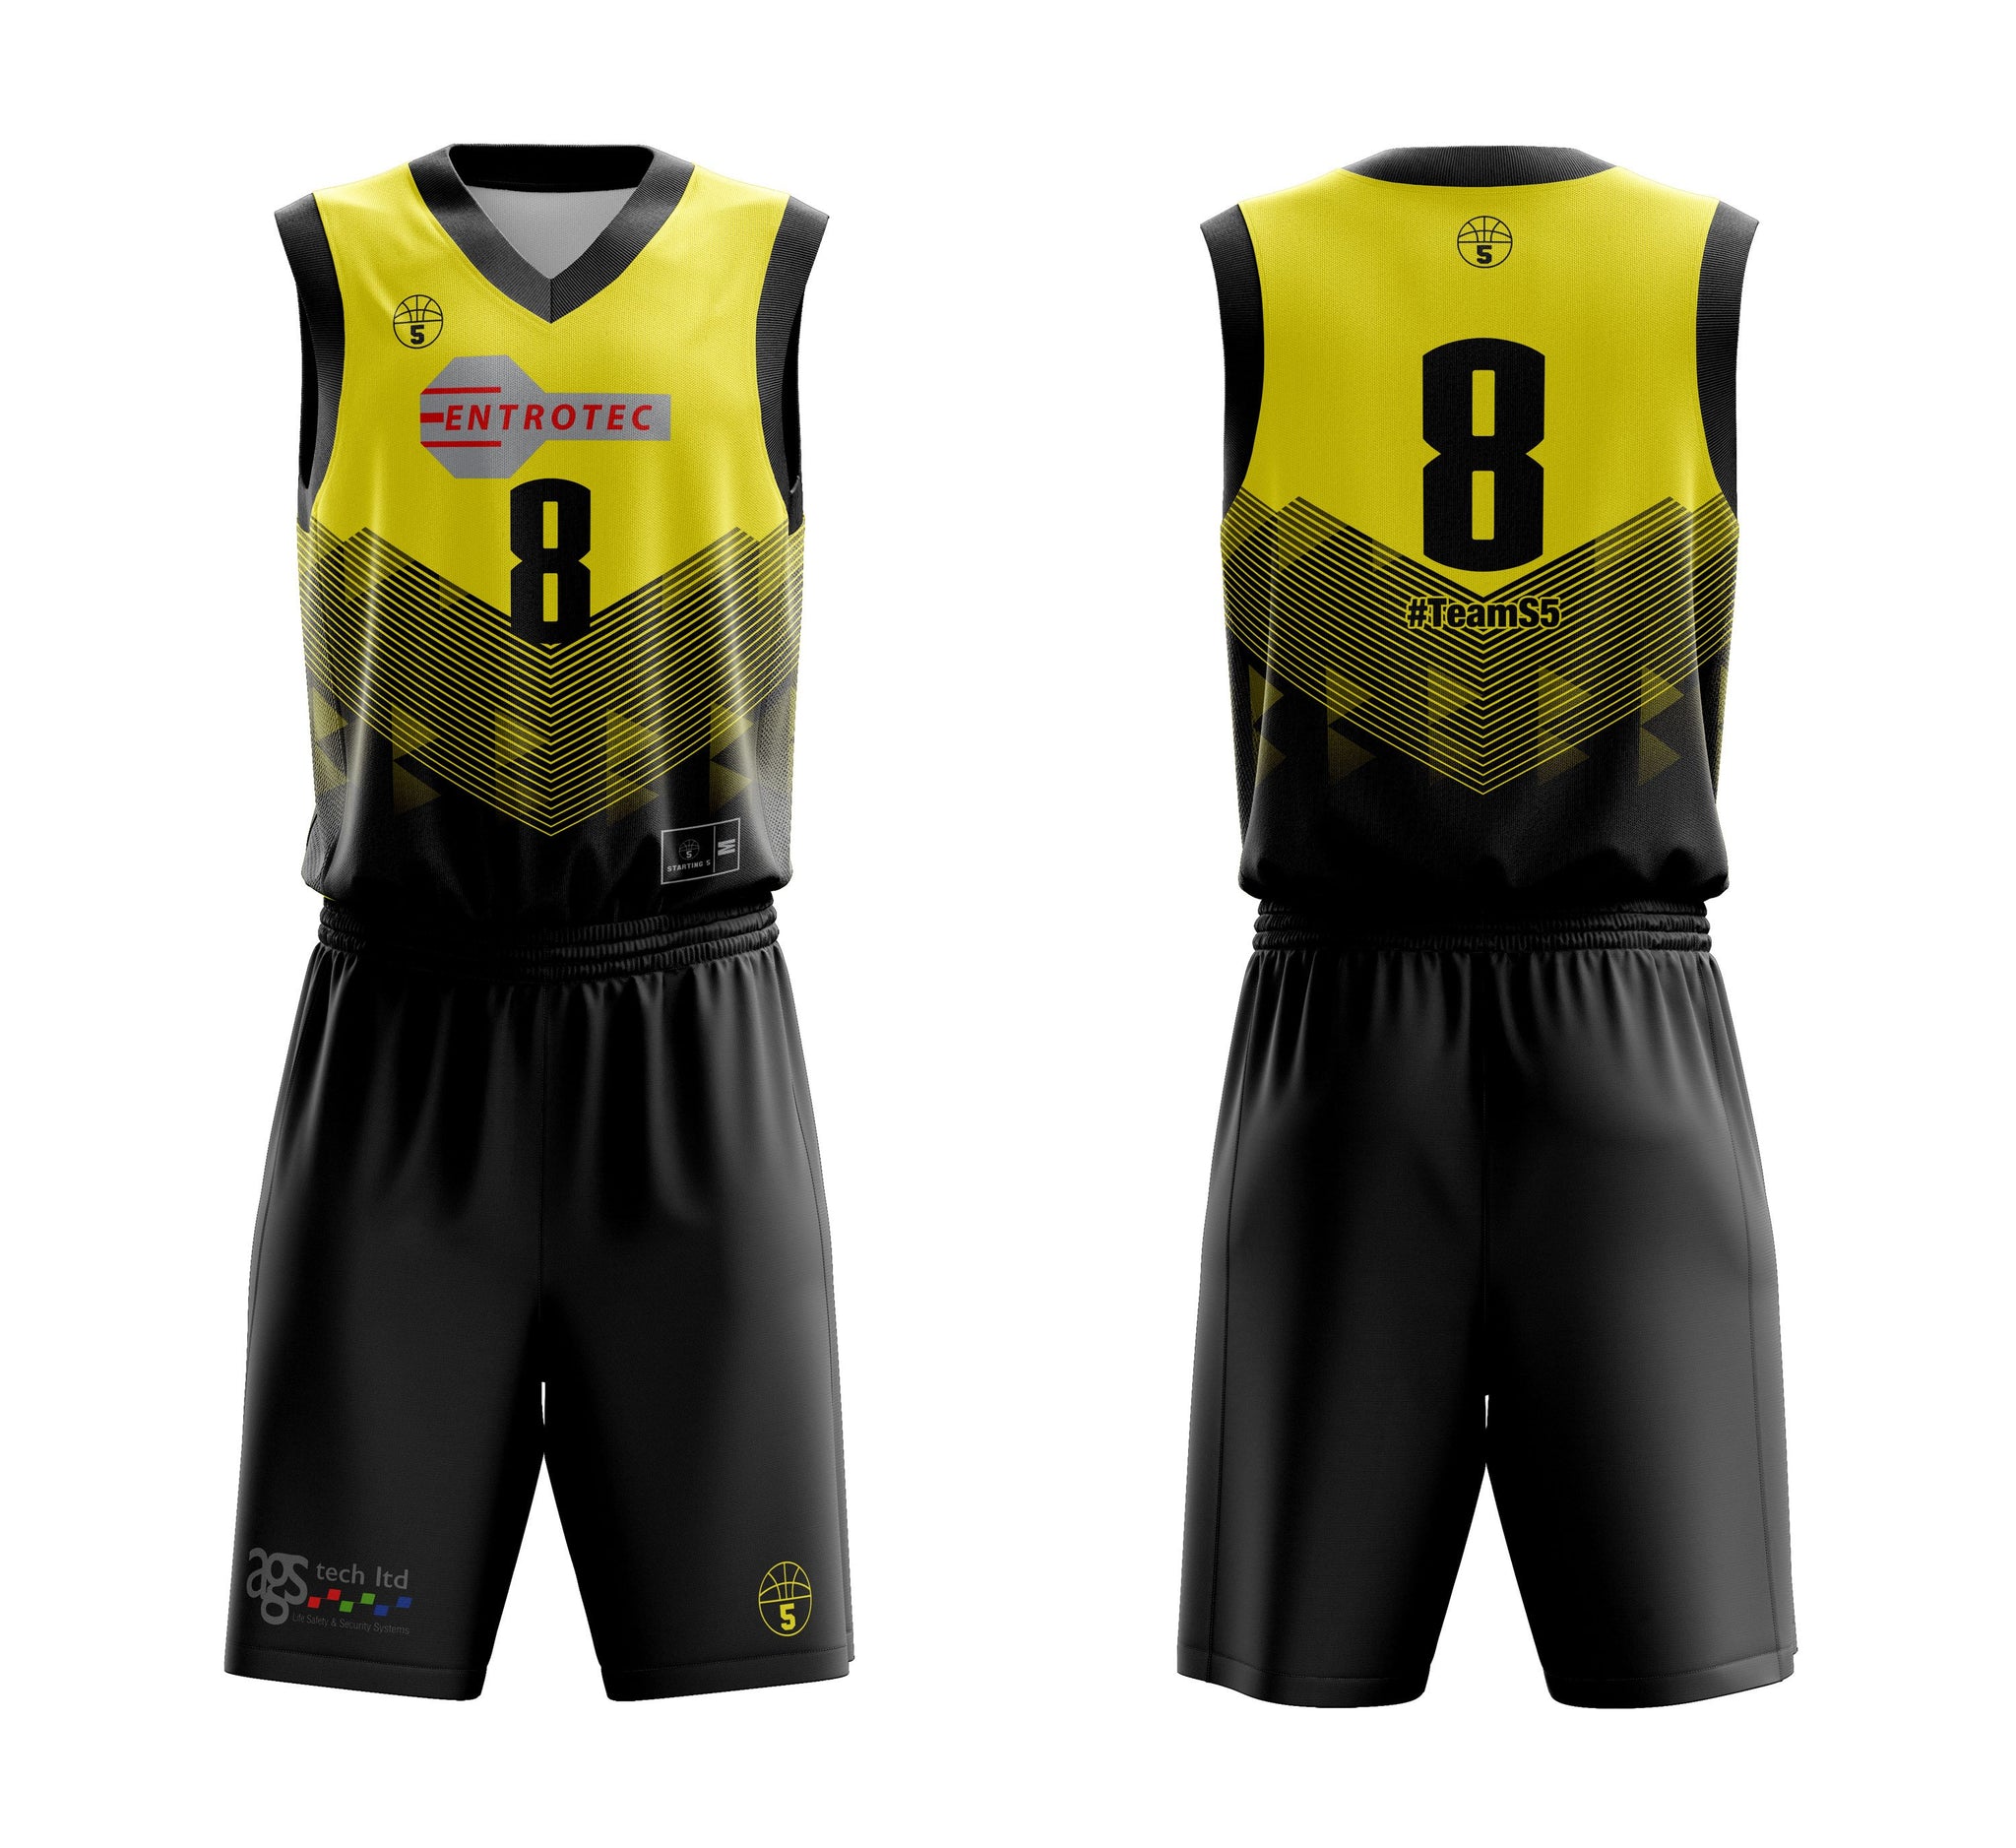 Unique Knights Full Sublimated Basketball Jersey